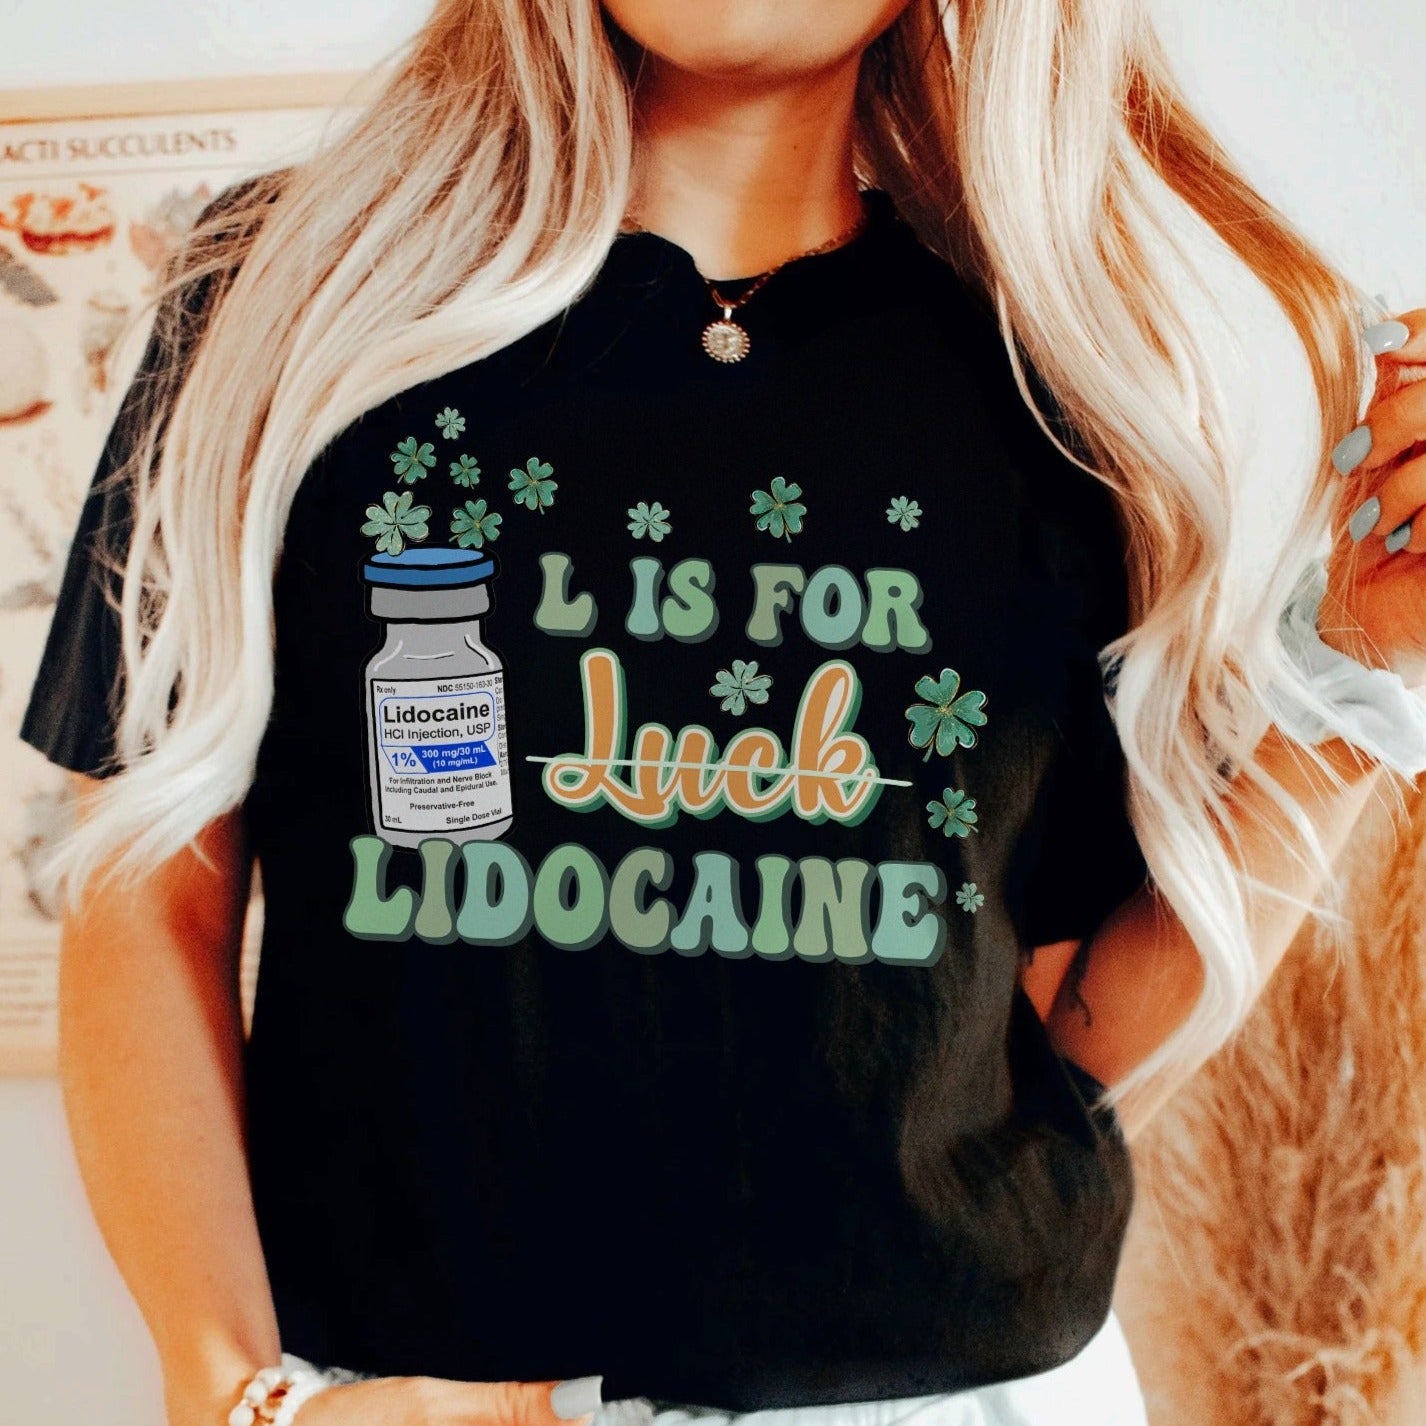 L is for Lidocaine T-Shirt